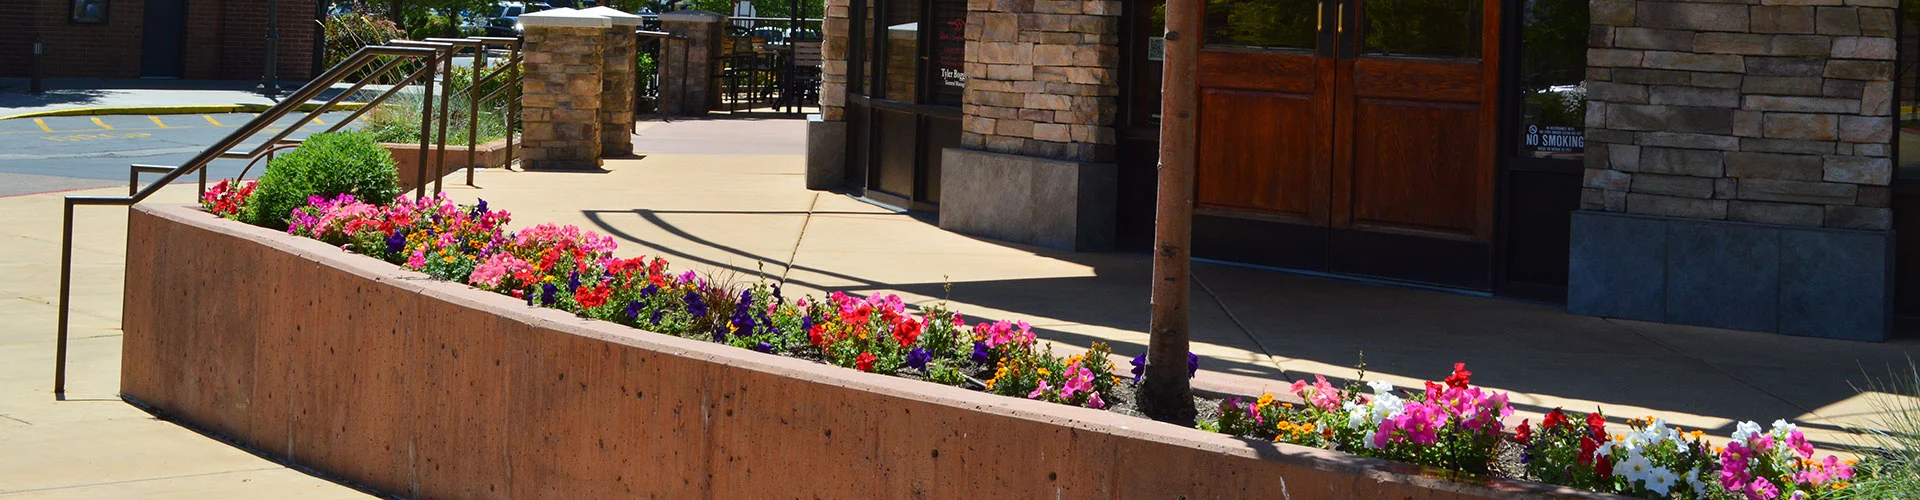 A commercial property in Draper where we recently installed landscaping.